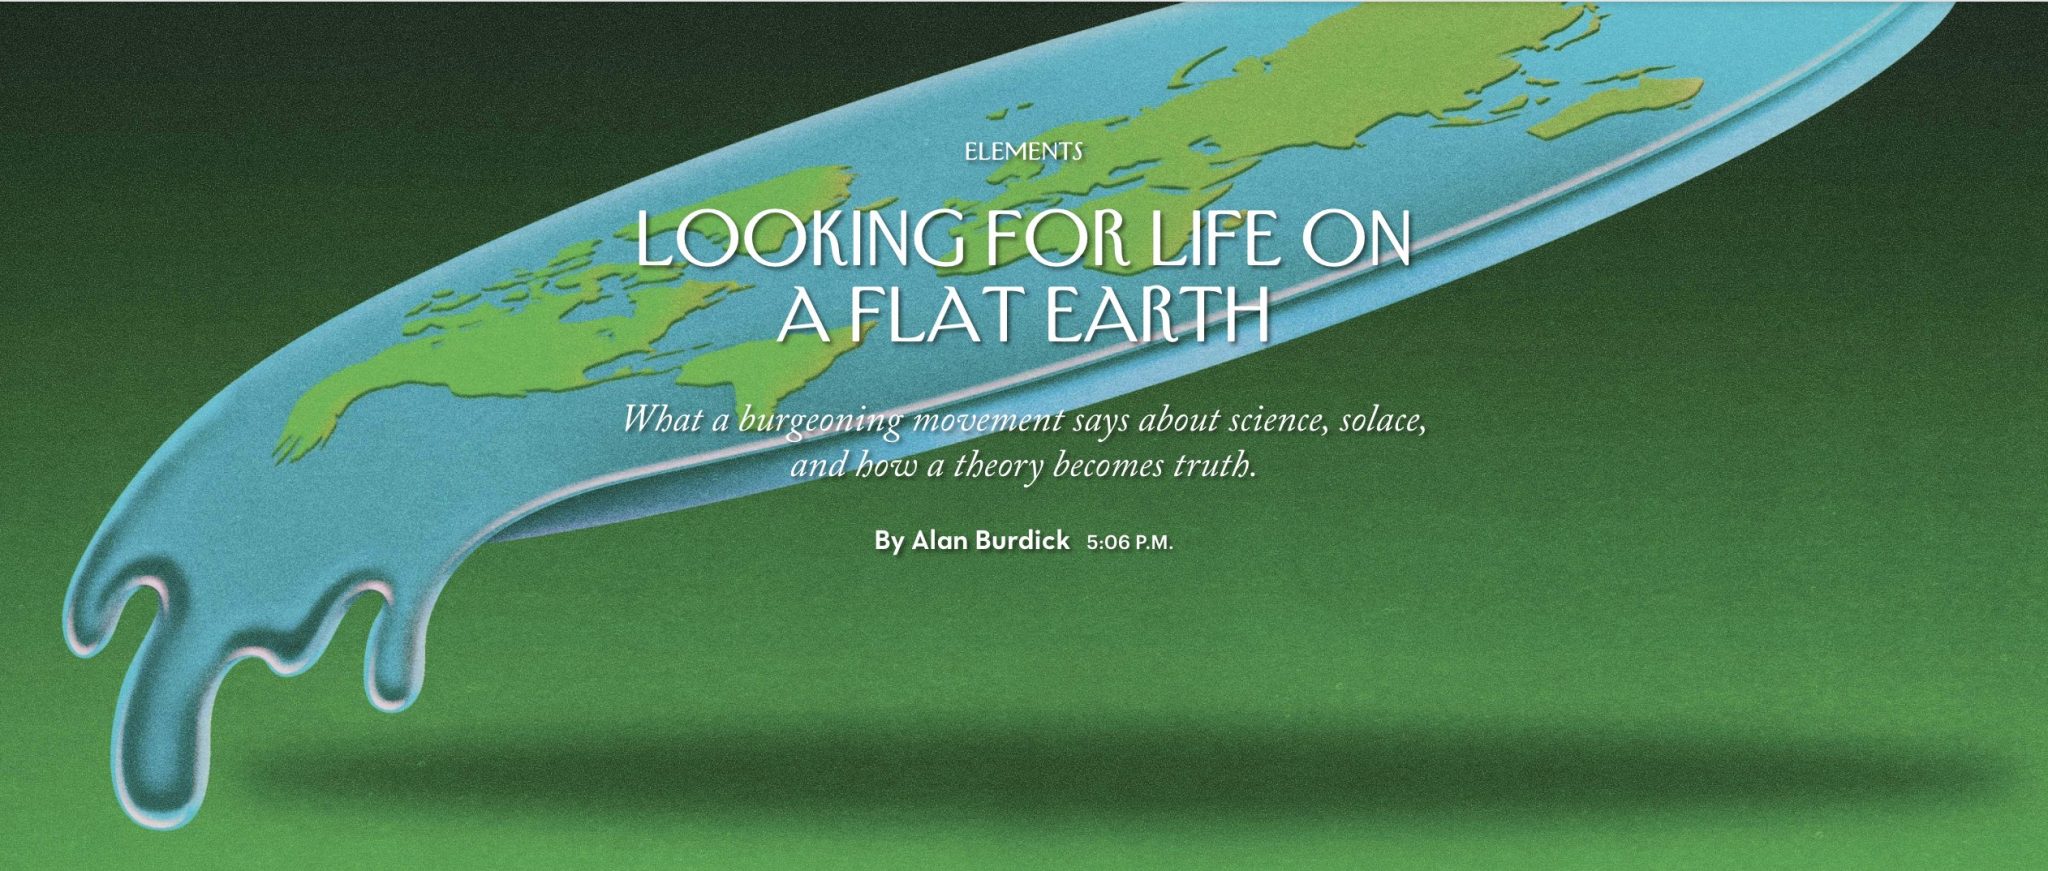 The New Yorker: Looking for Life on a Flat Earth